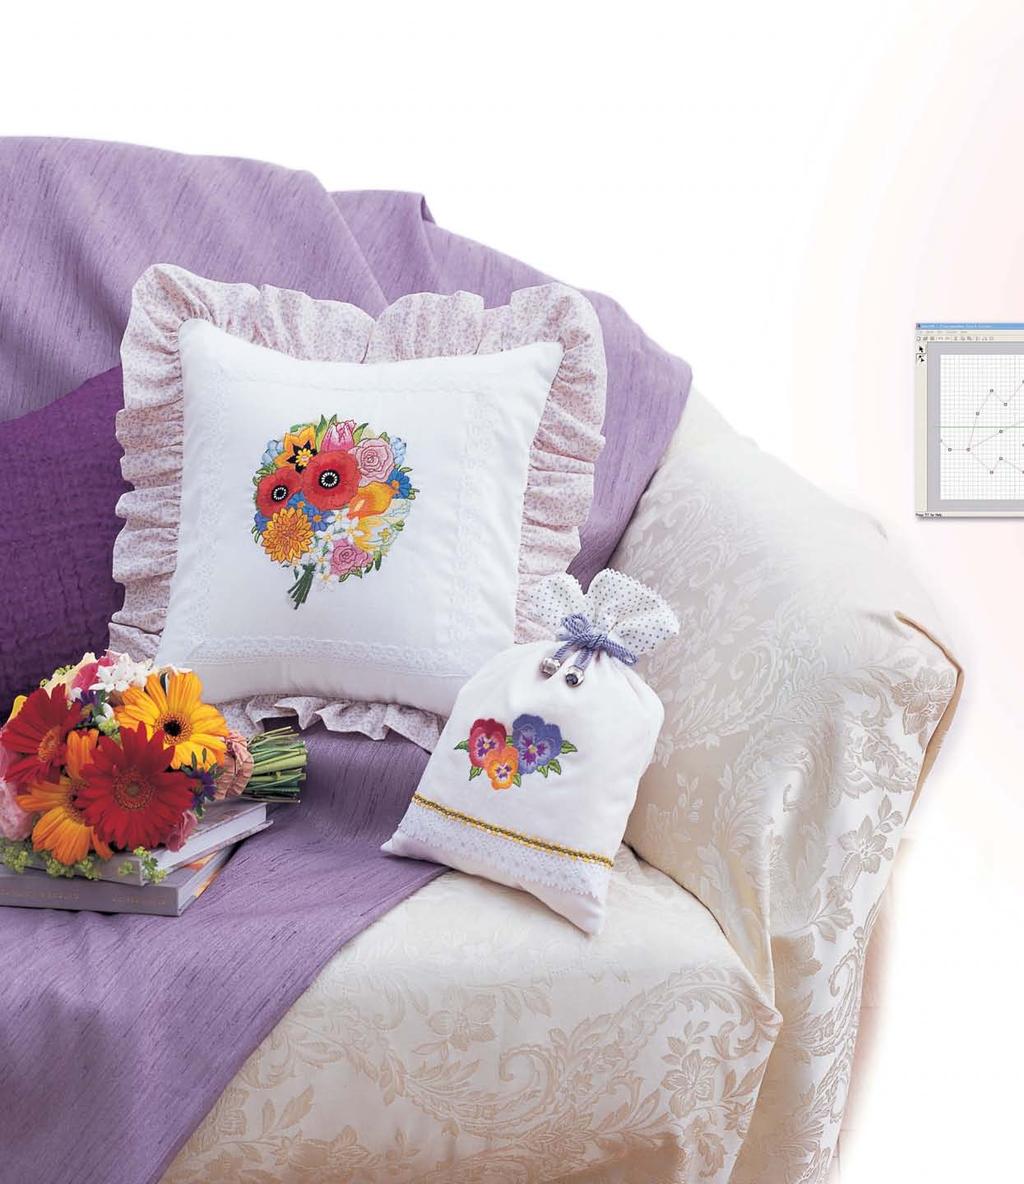 Realize your embroid Creating individual embroidery projects is now easier than ever!